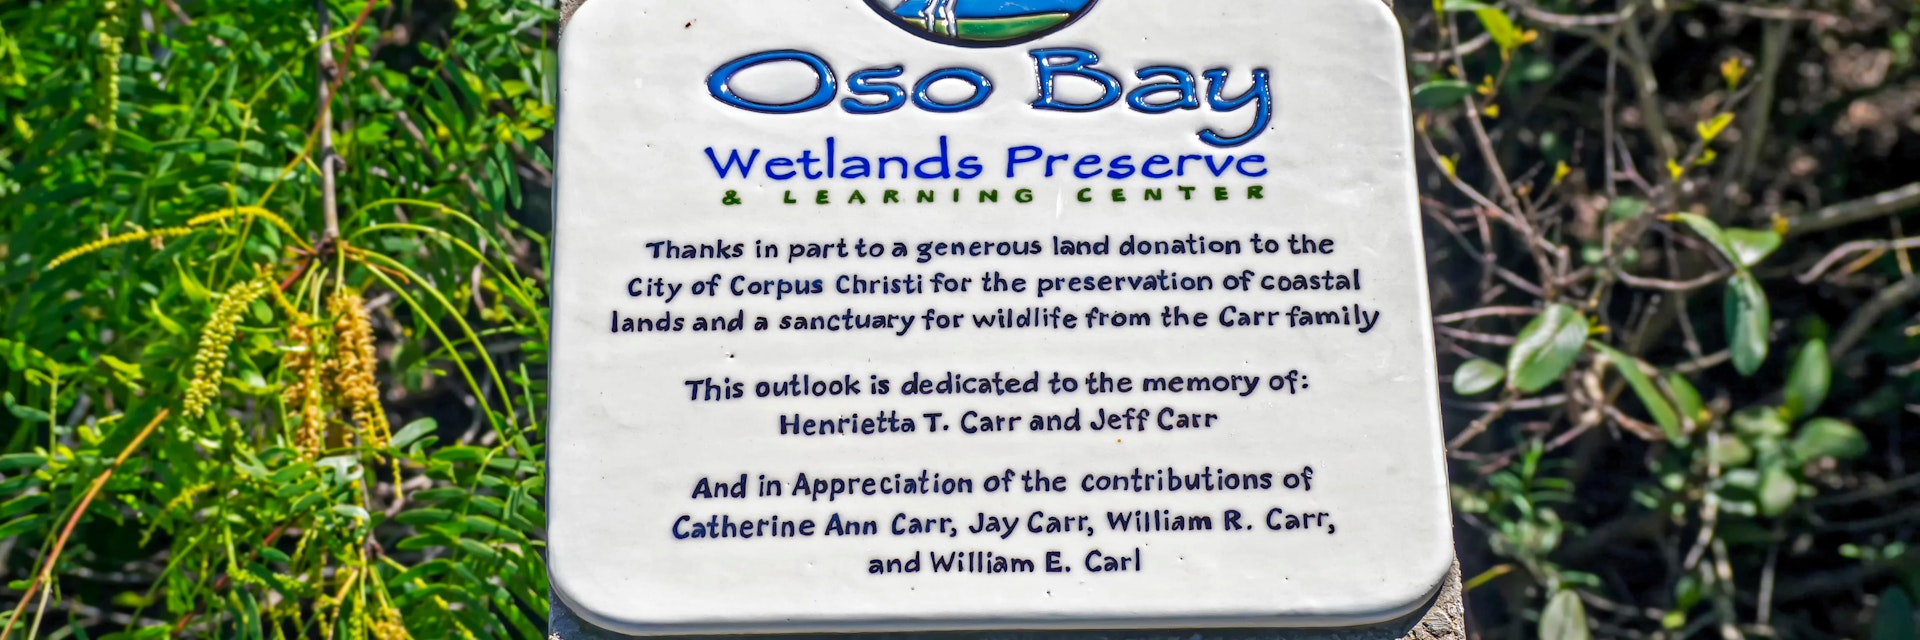 2A3HTW6 Decorative plaque at Oso Bay Wetlands Preserve & Learning Center thanking the city of Corpus Christi, Texas USA for a land donation.